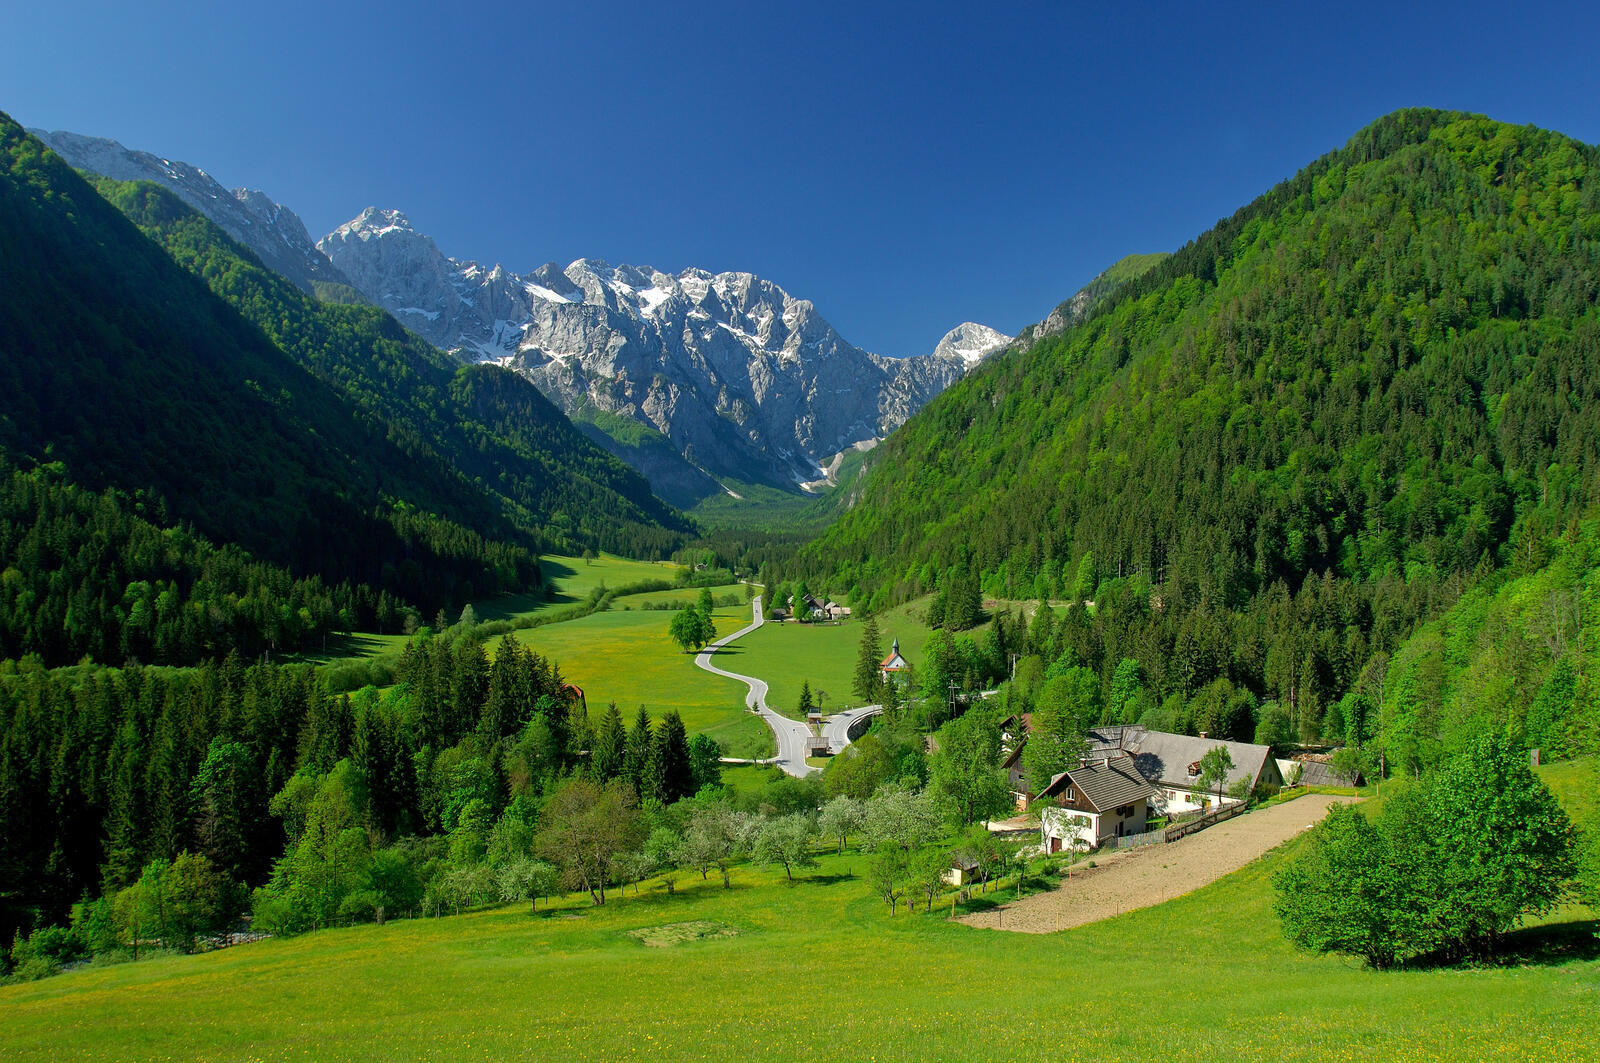 Wallpapers Alpine mountains gorges countryside on the desktop